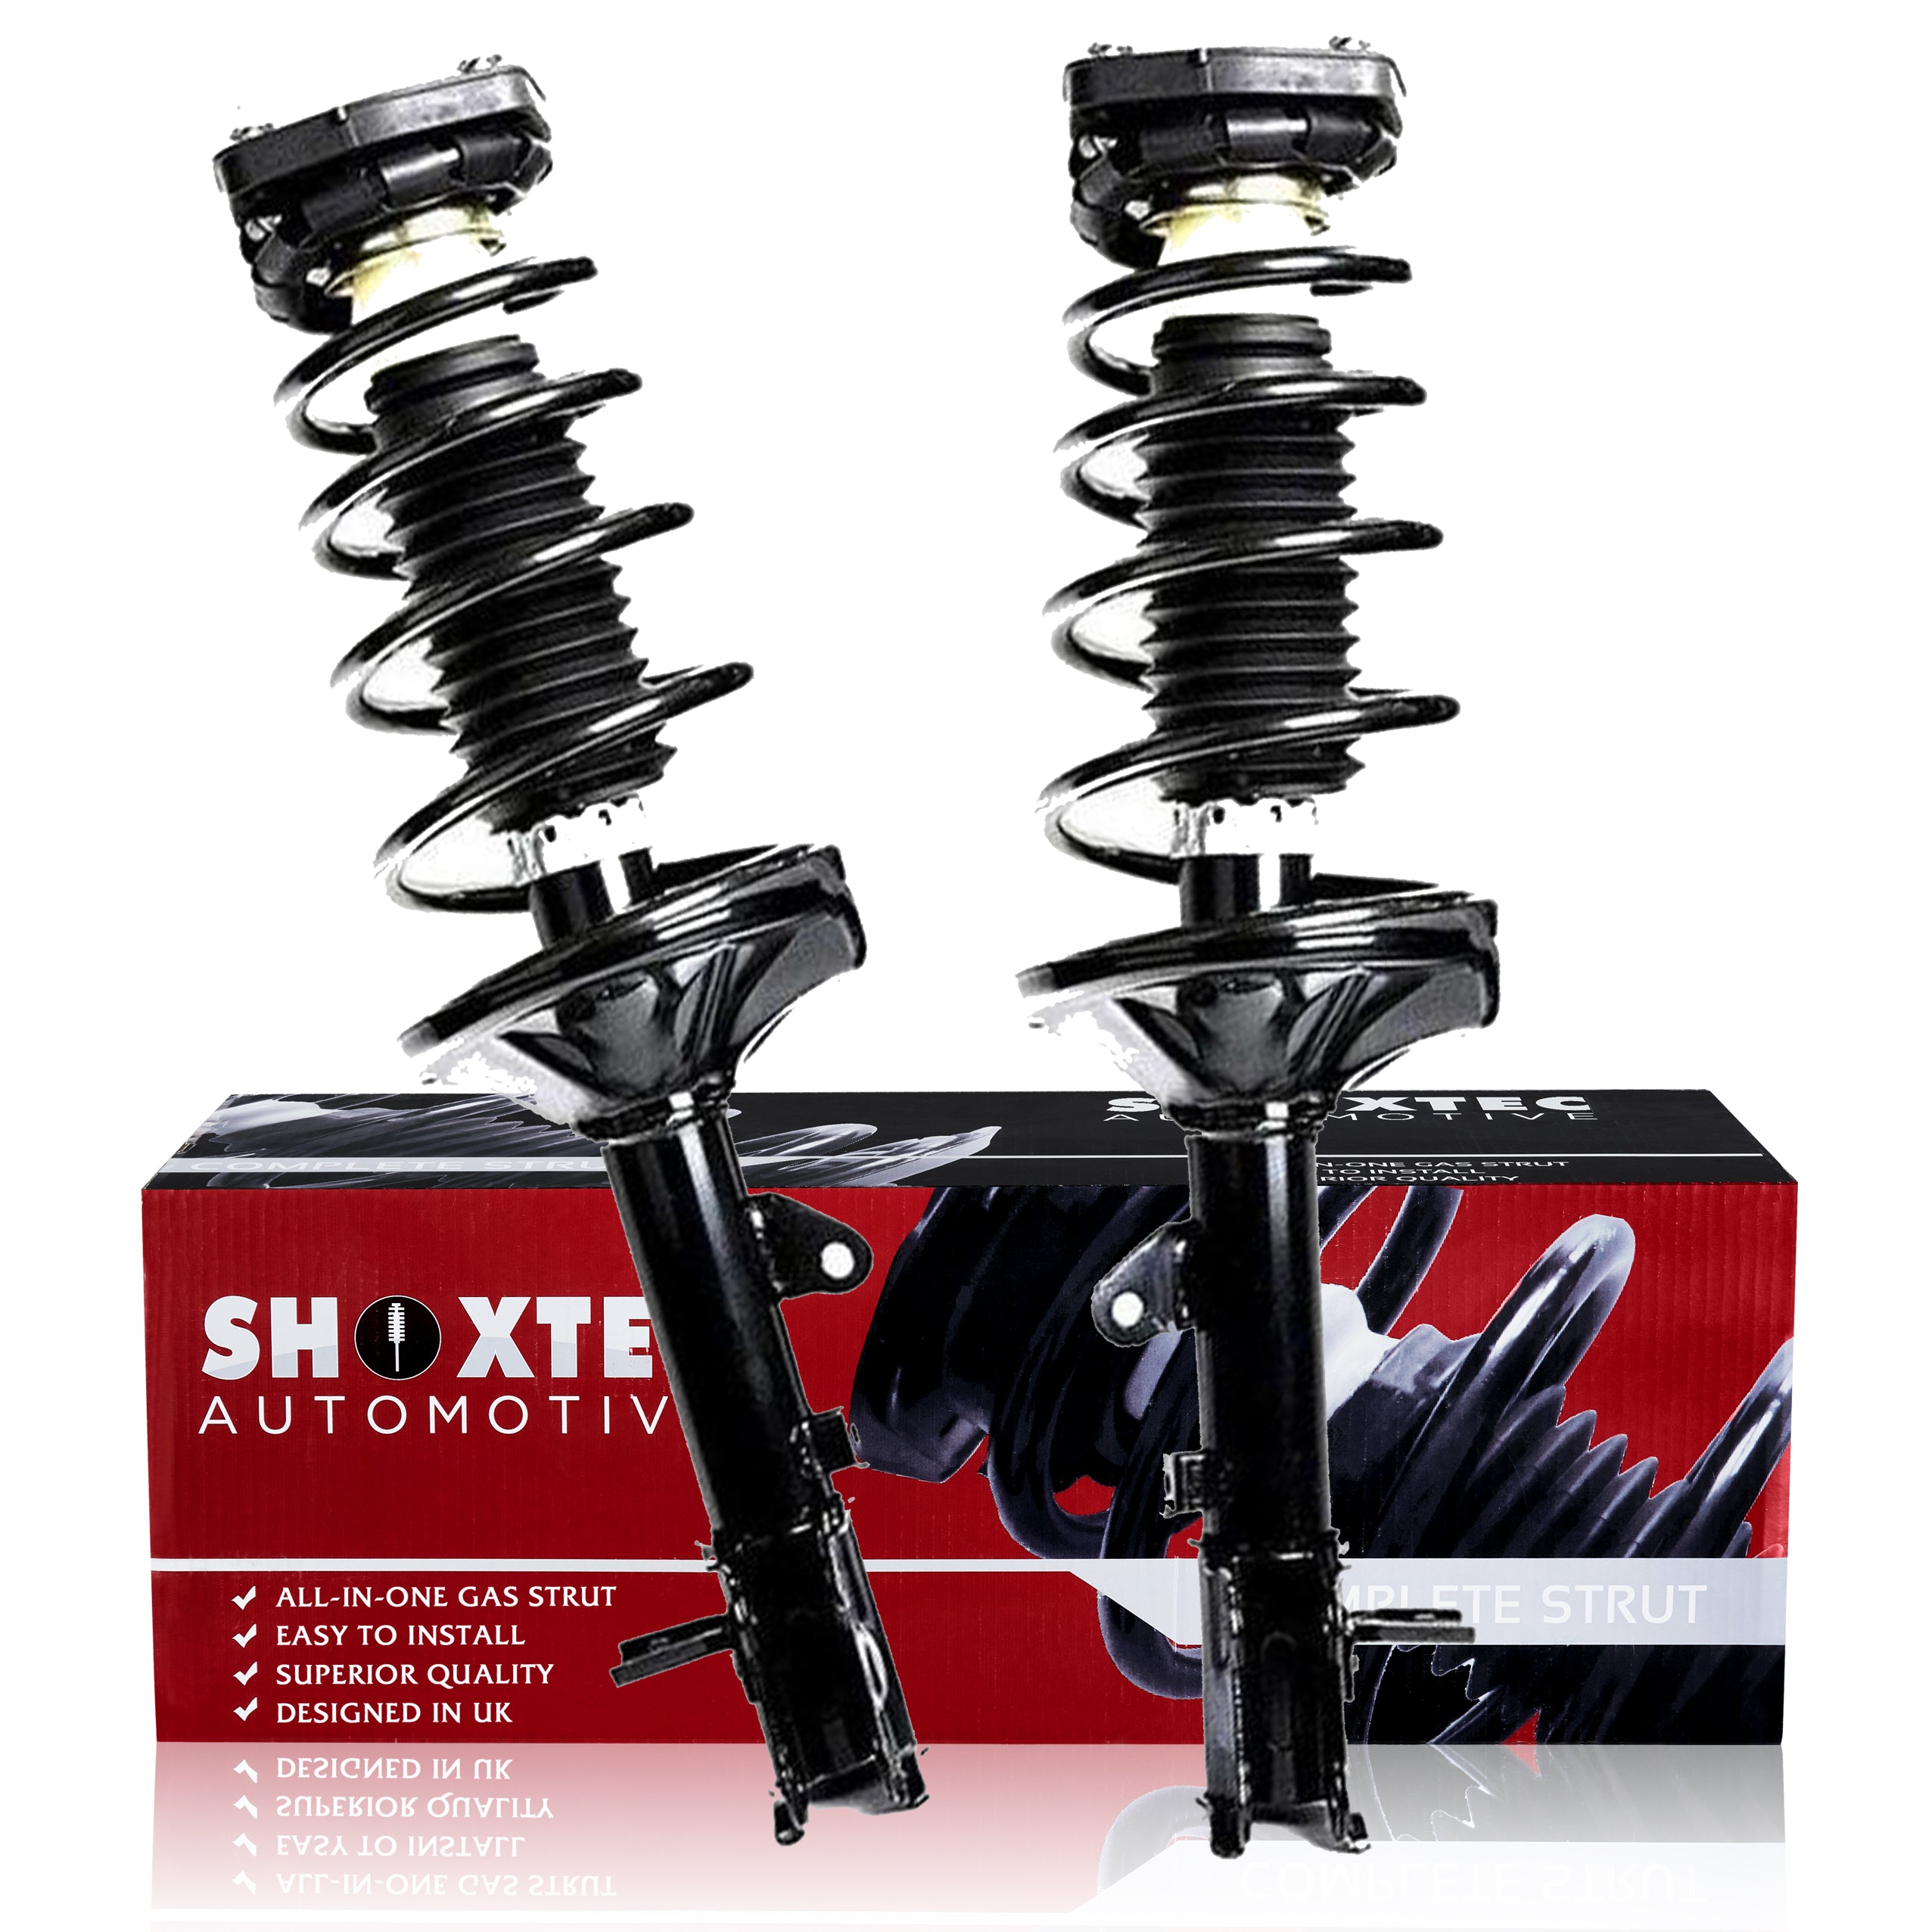 Shoxtec Rear Complete Struts assembly for 2000 - 2006 Hyundai Elantra 2.0L I4 Coil Spring Assembly Shock Absorber Repl. Part no. 171406 171407 - image 1 of 7